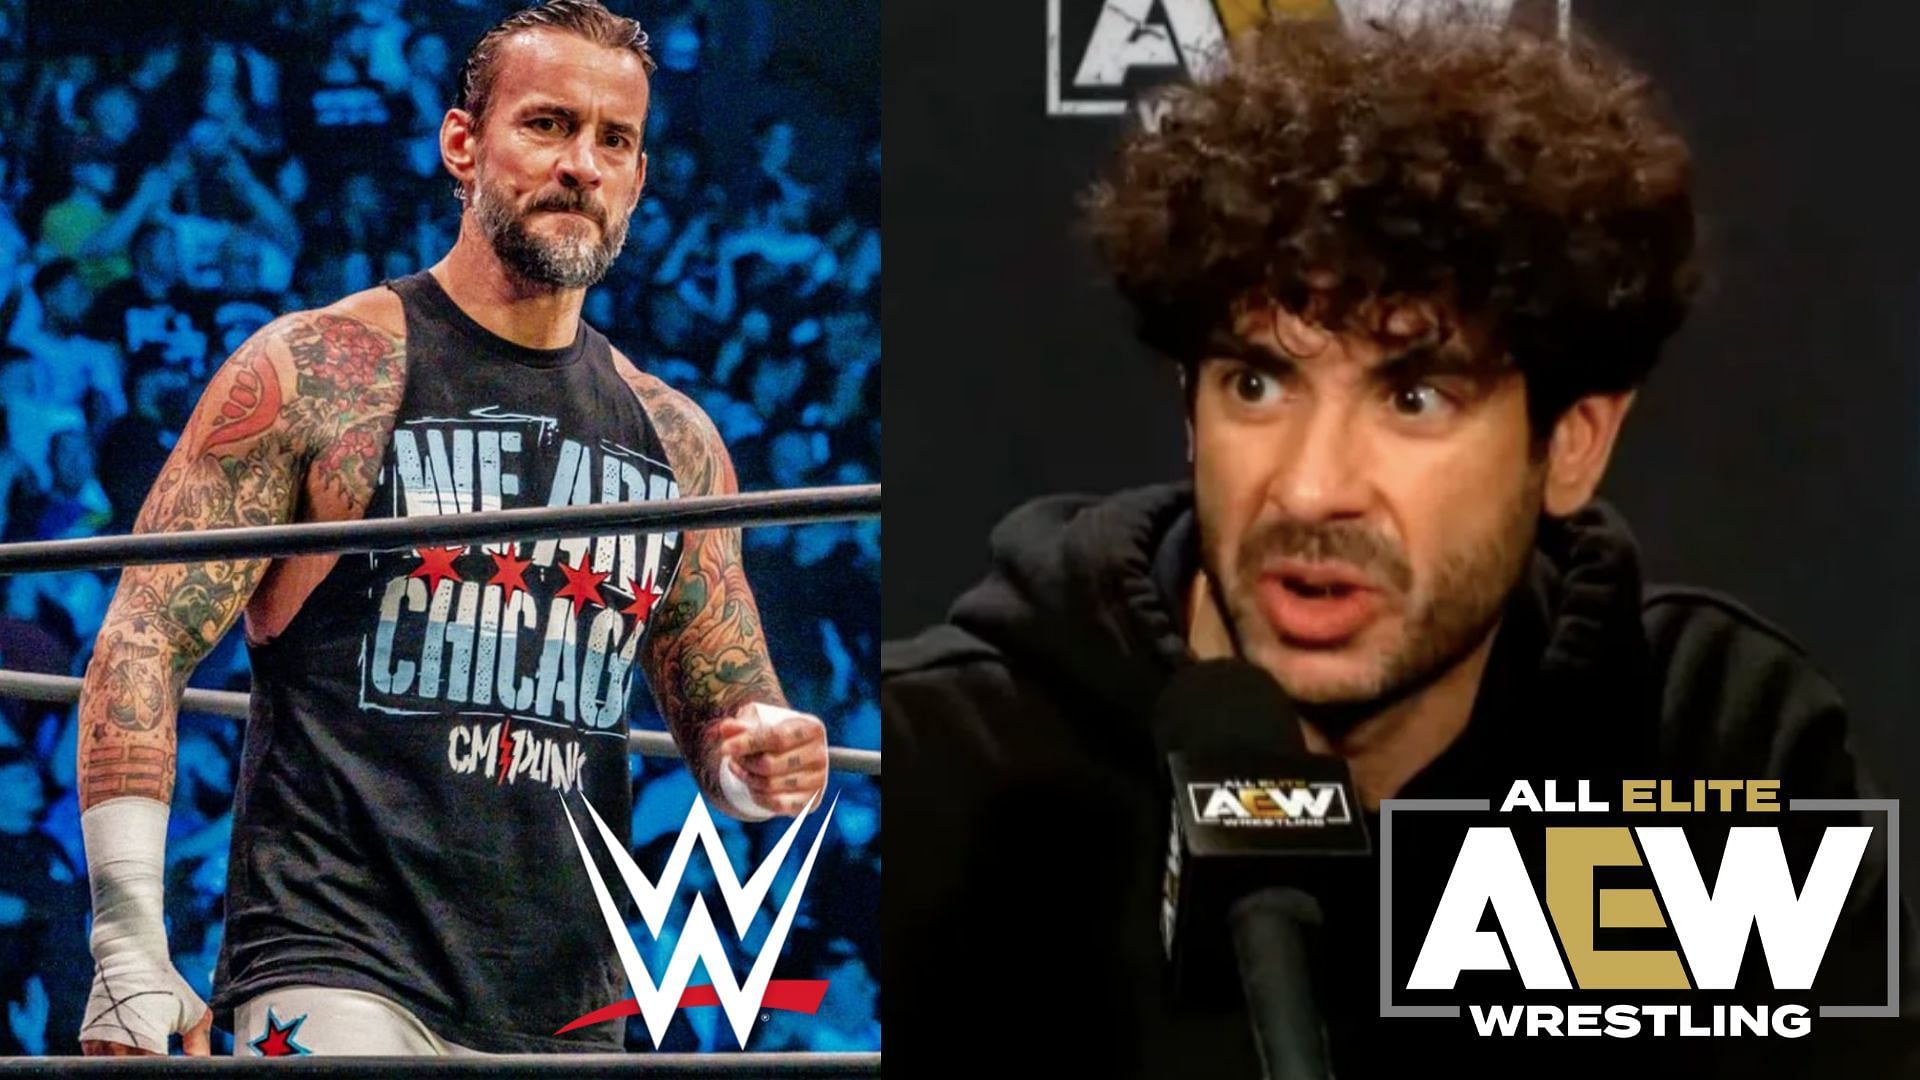 Tony has made a number of high-profile mistakes running AEW